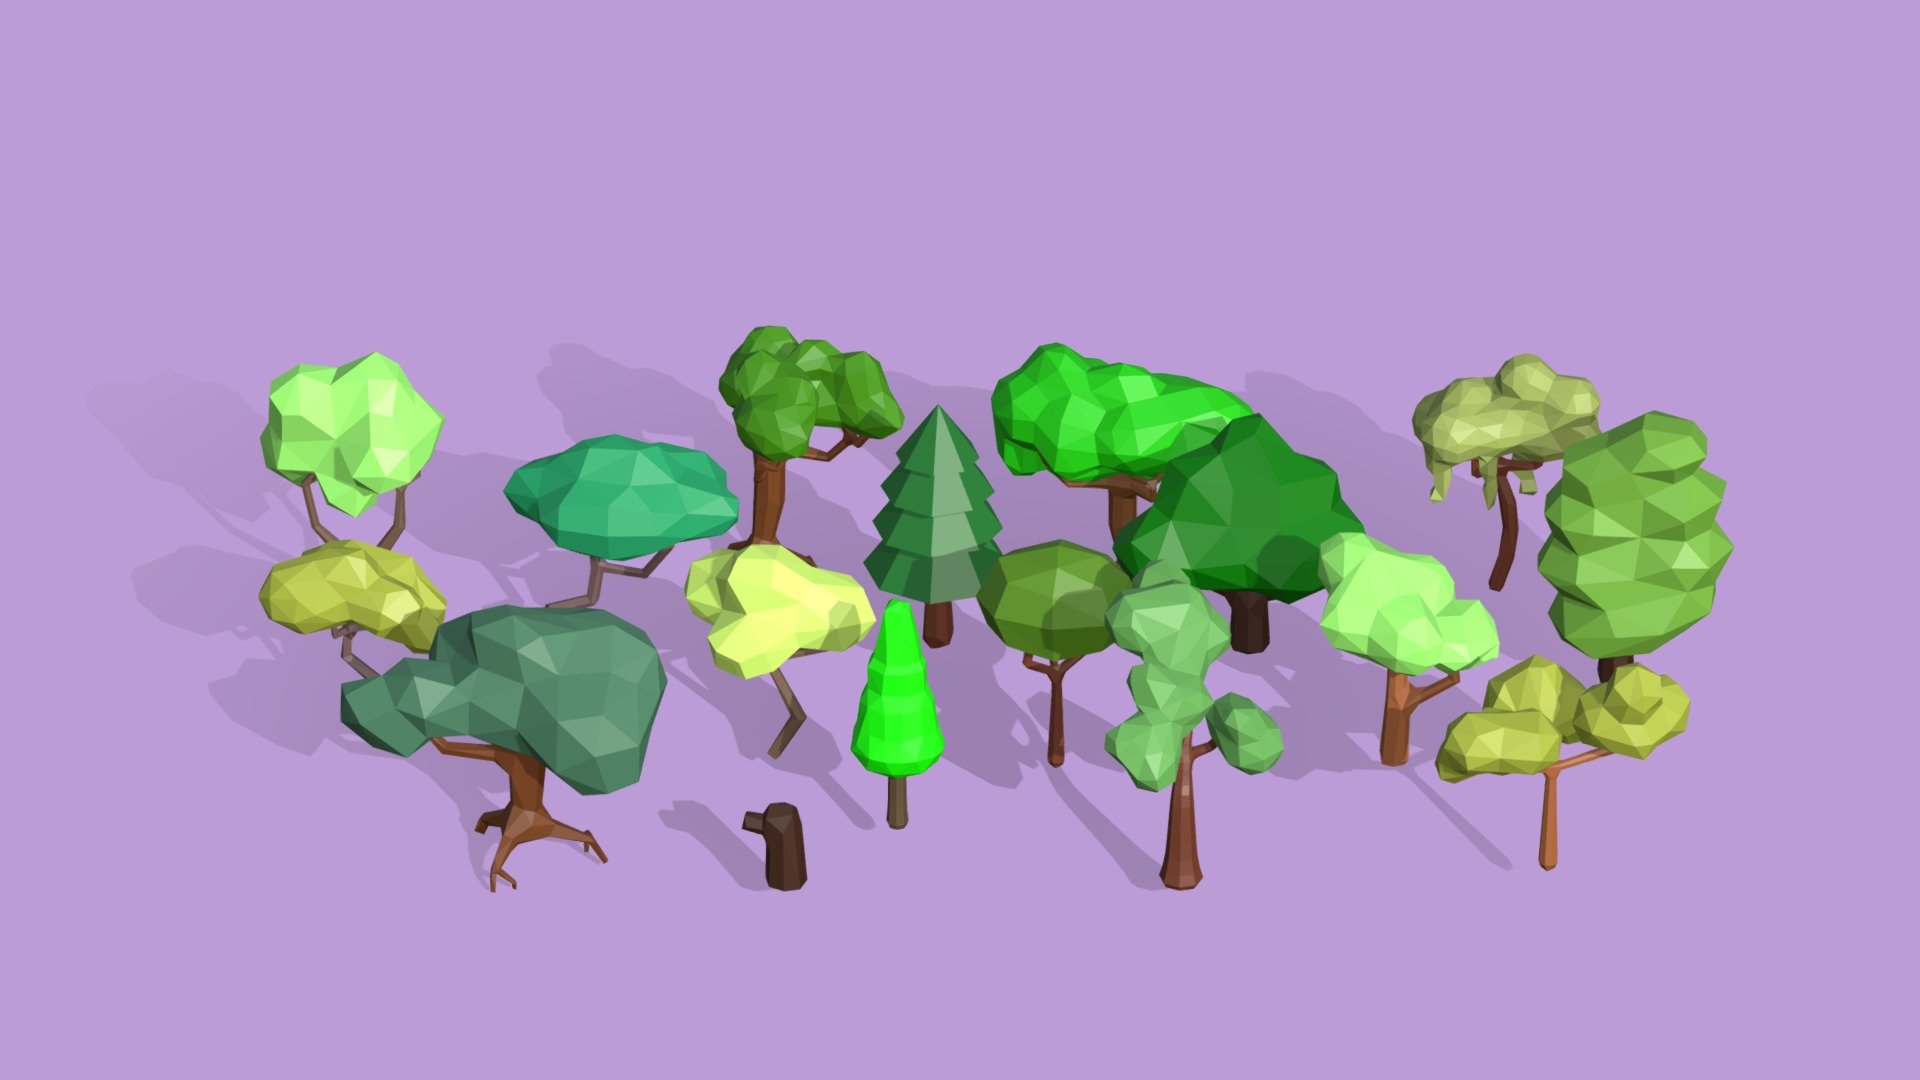 This pack contains 17 different low poly trees.

All the models are low poly and game ready.



please, contact me if you have any requests, you want any changes or diffrent file formats.
mhdglmhmd96@gmail.com


FREE cloud pack:https://skfb.ly/oIGou

FLOWER pack: https://skfb.ly/oIGpn

FREE Stone Pack: https://skfb.ly/oIUrE

Mushroom pack: https://skfb.ly/oJ7Dp - Stylized Low Poly Tree Pack - Buy Royalty Free 3D model by Mahdi.G 3d model